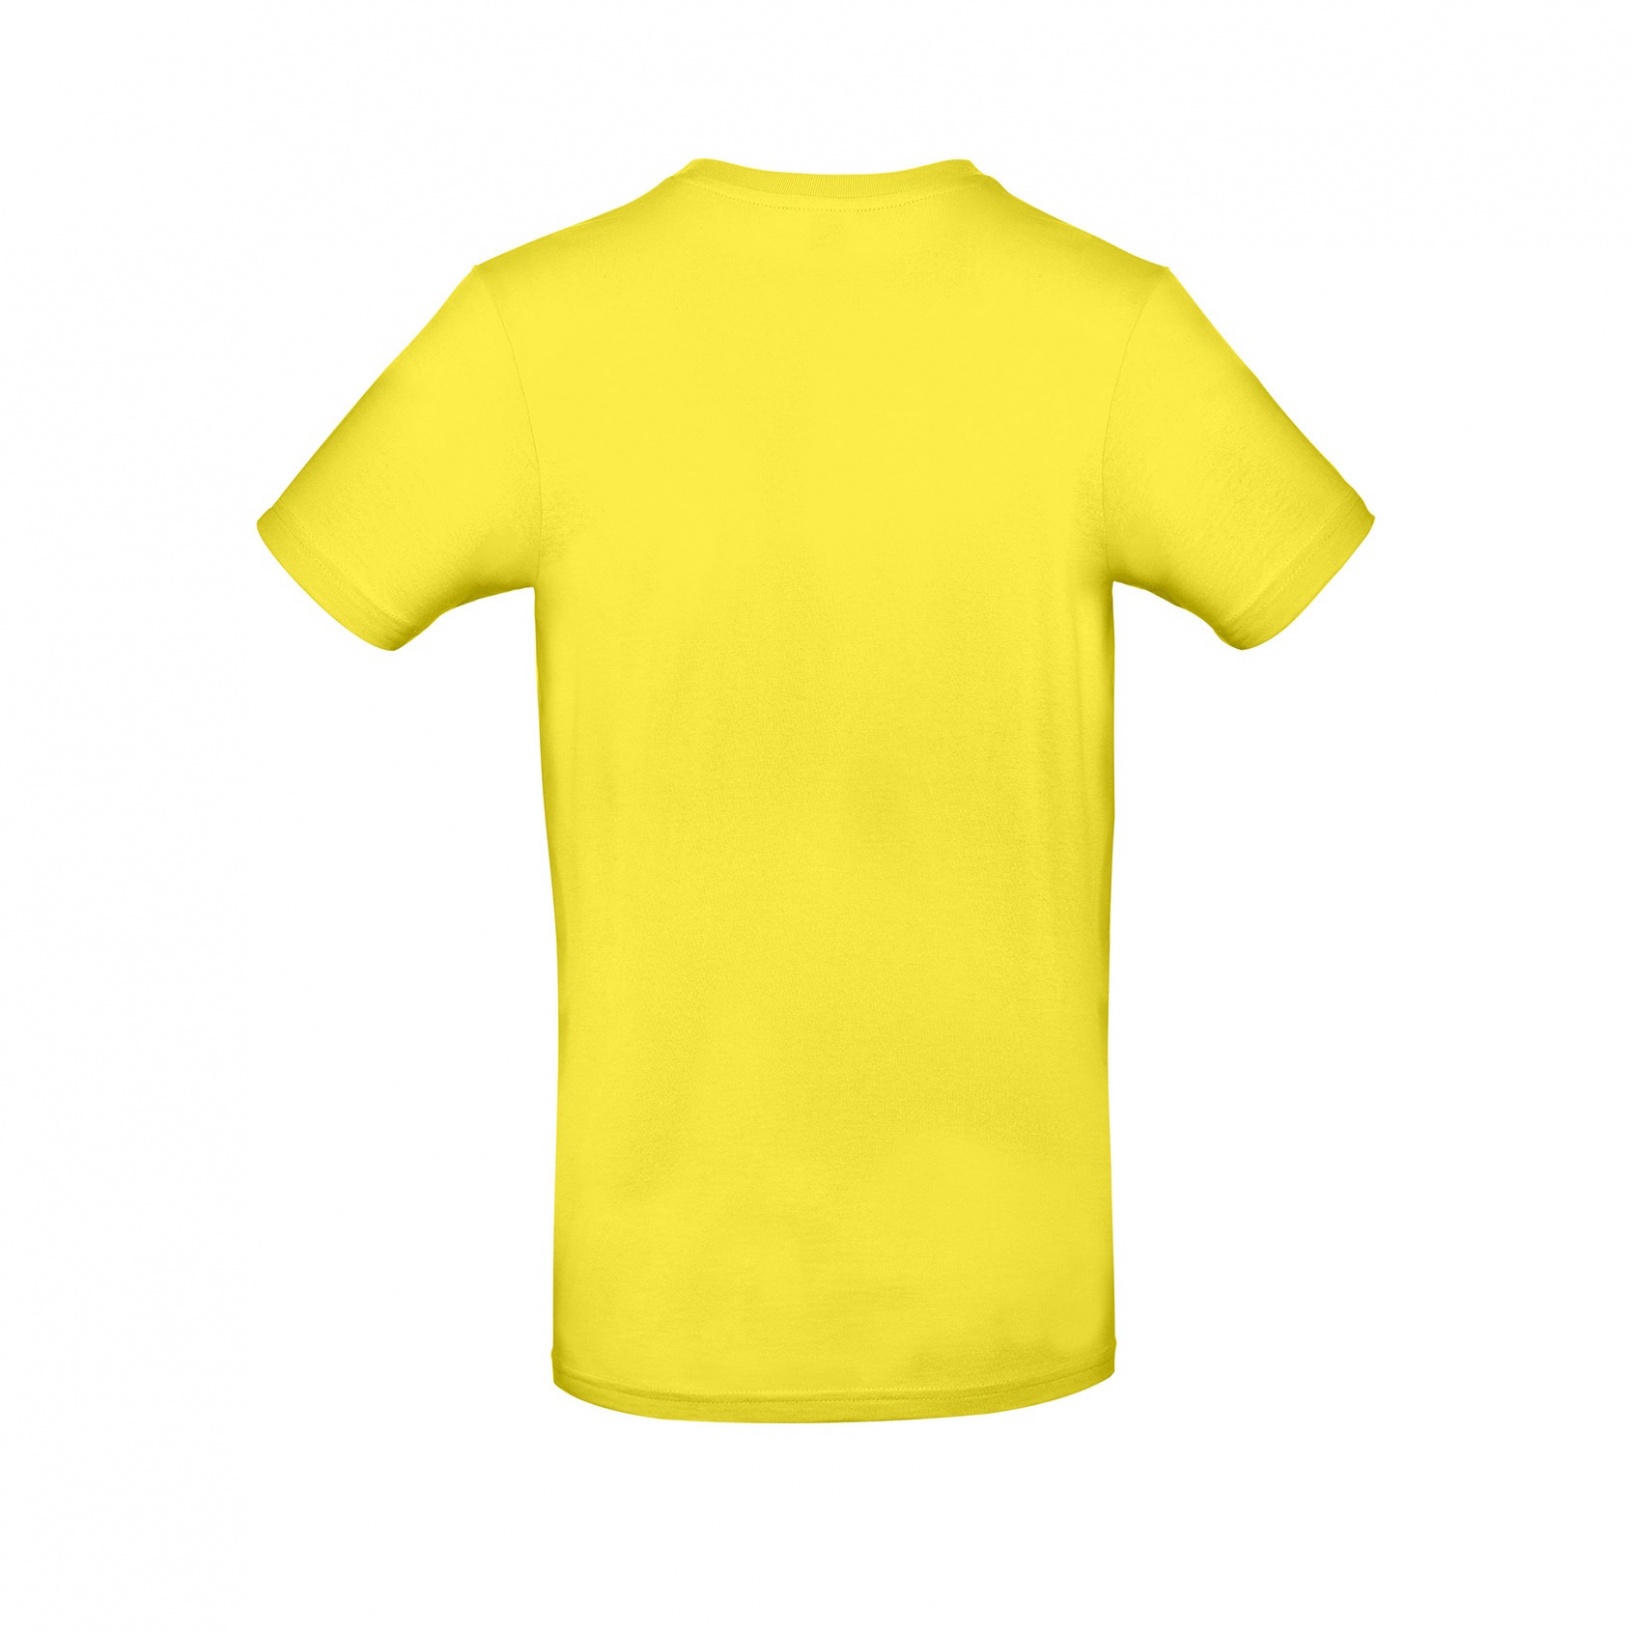 SOLECTION I Love LV Unisex Short Sleeve Jersey T-Shirt Yellow / 4XL